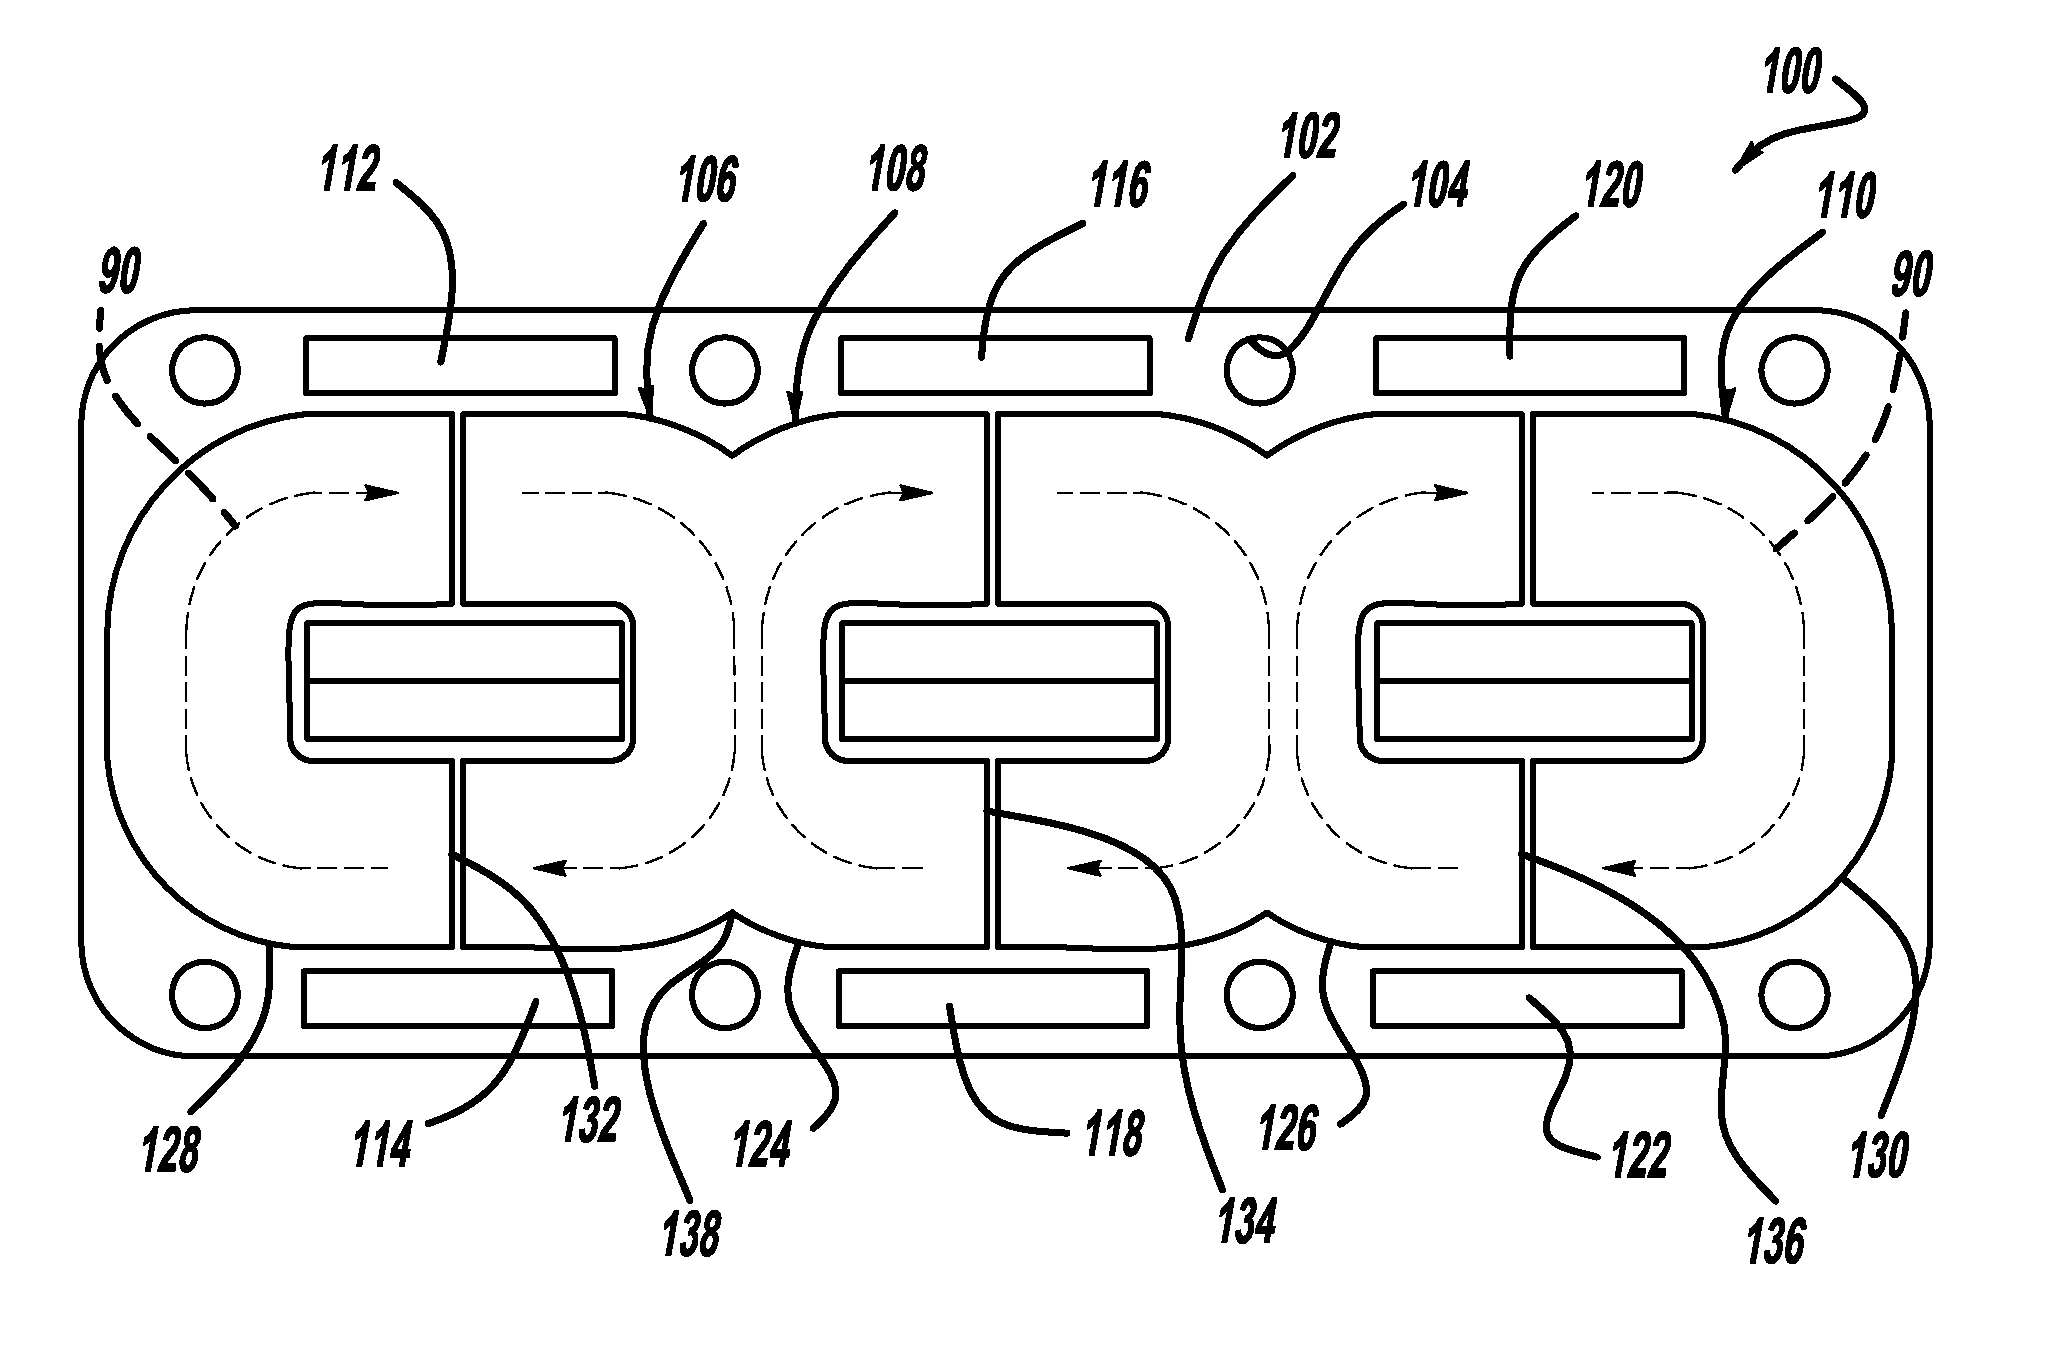 Dc-dc converter for fuel cell application using hybrid inductor core material